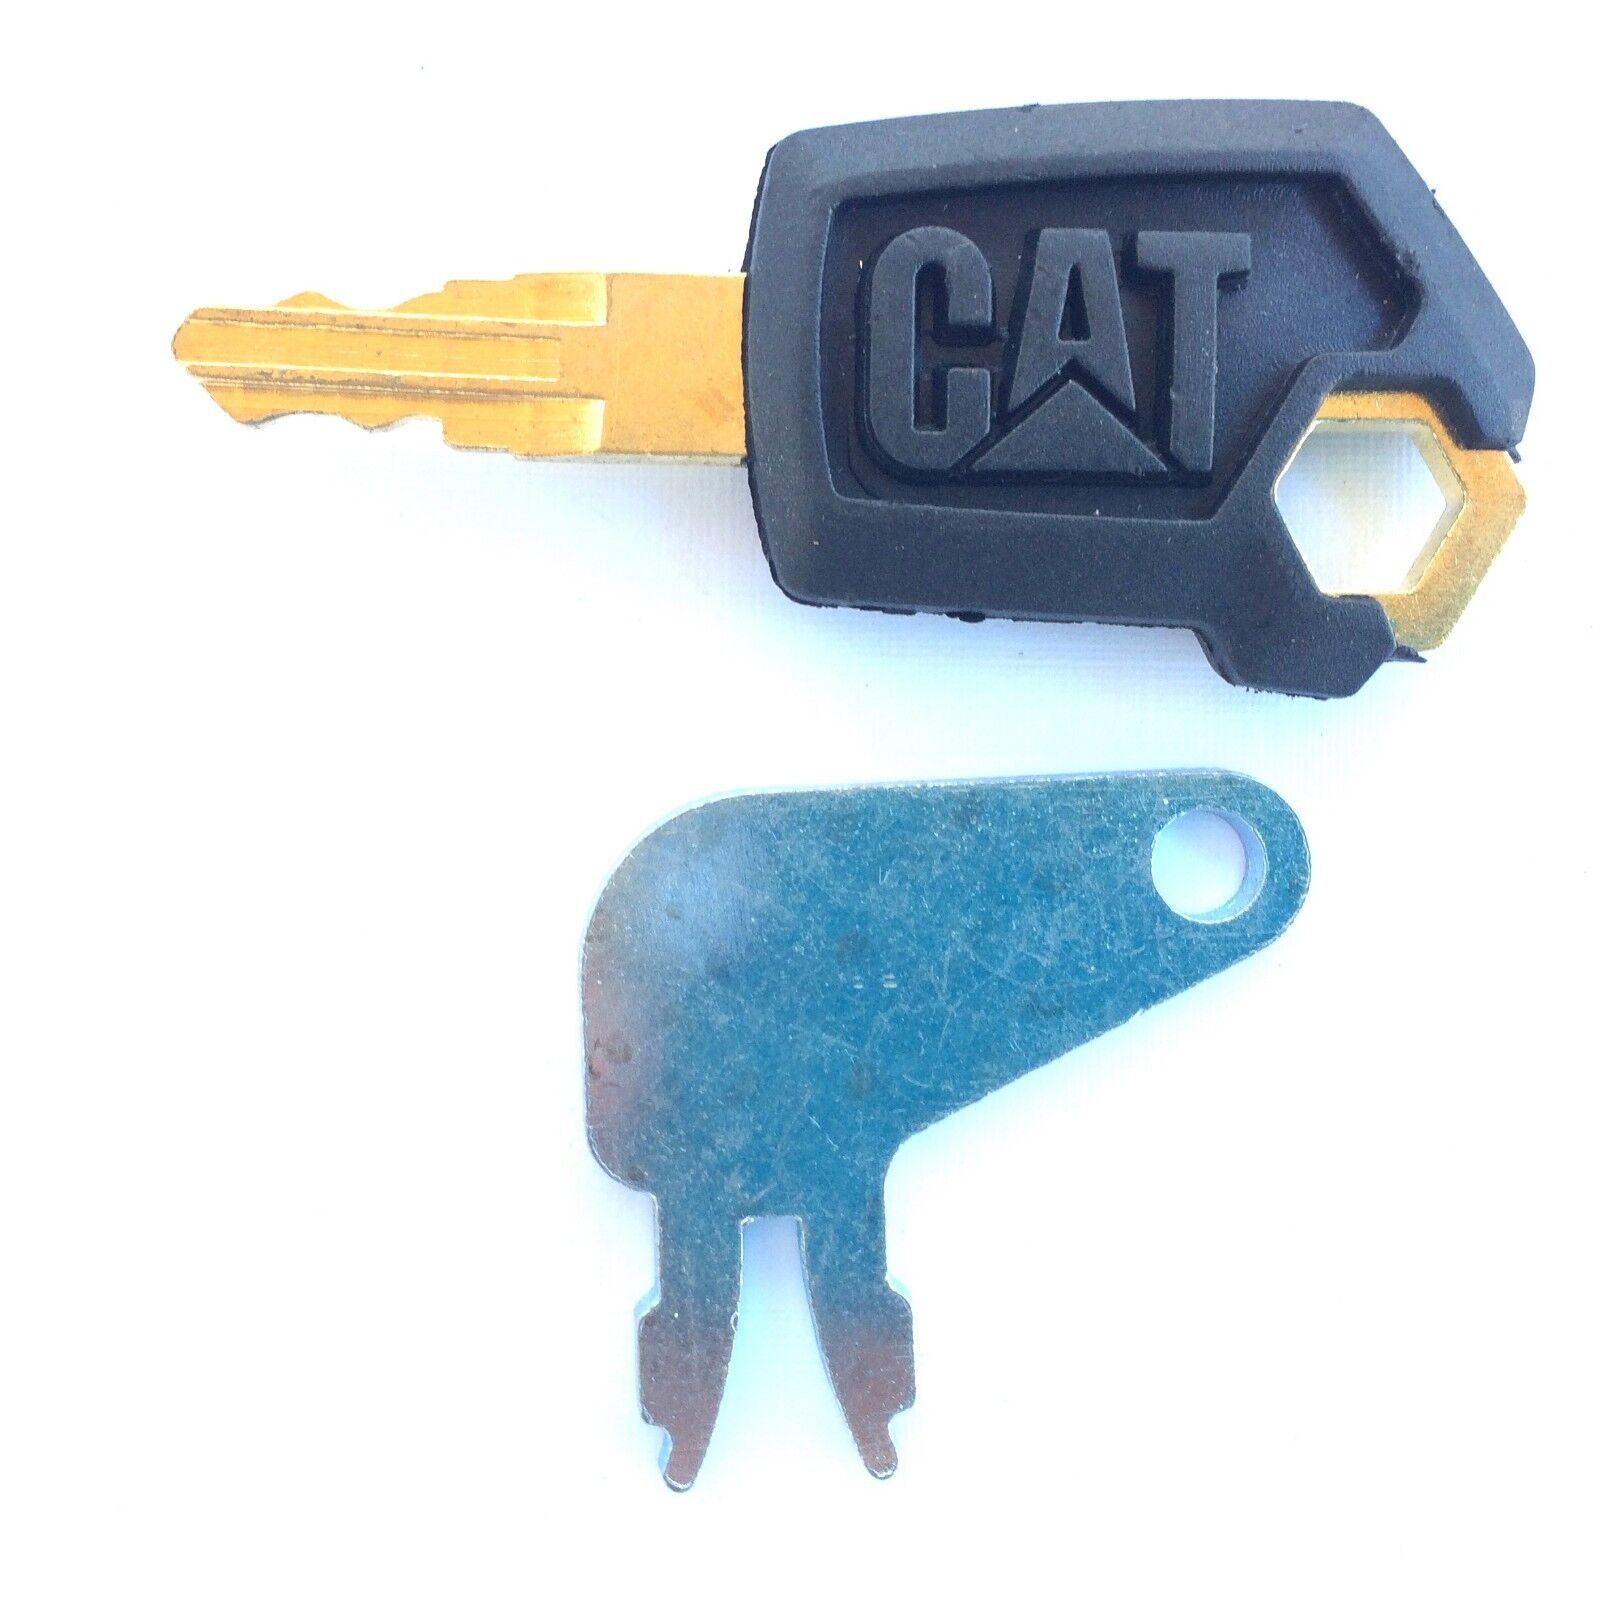 CAT - Caterpillar Equipment Key Set Ignition and Master Disconnect with Logo CAT 8398 & 5P-8500 - фотография #2